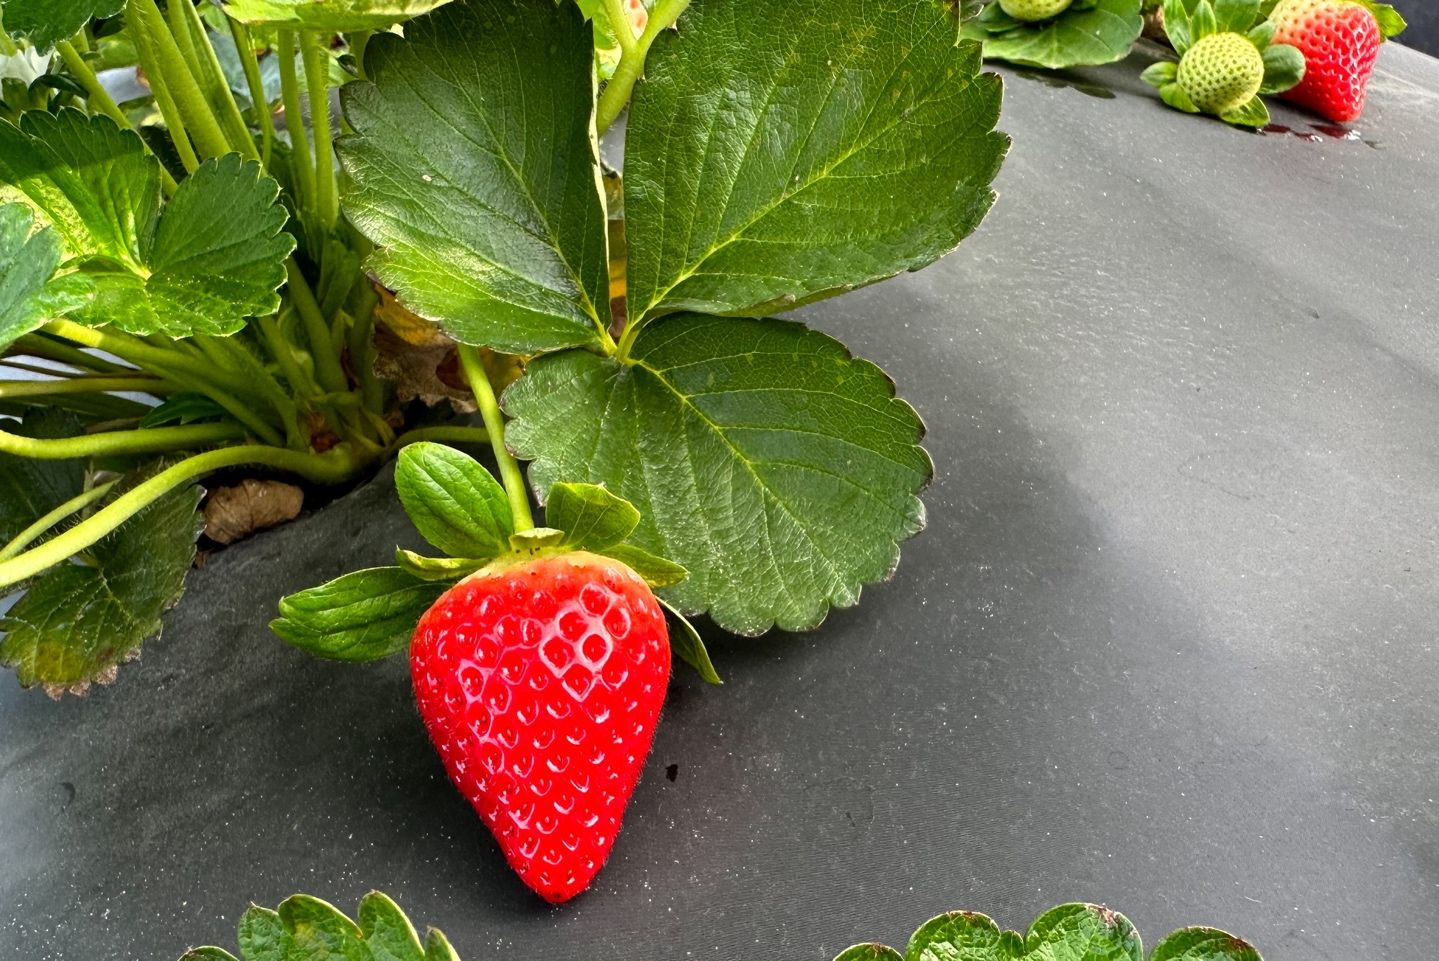 A strawberry on a plant

Description automatically generated